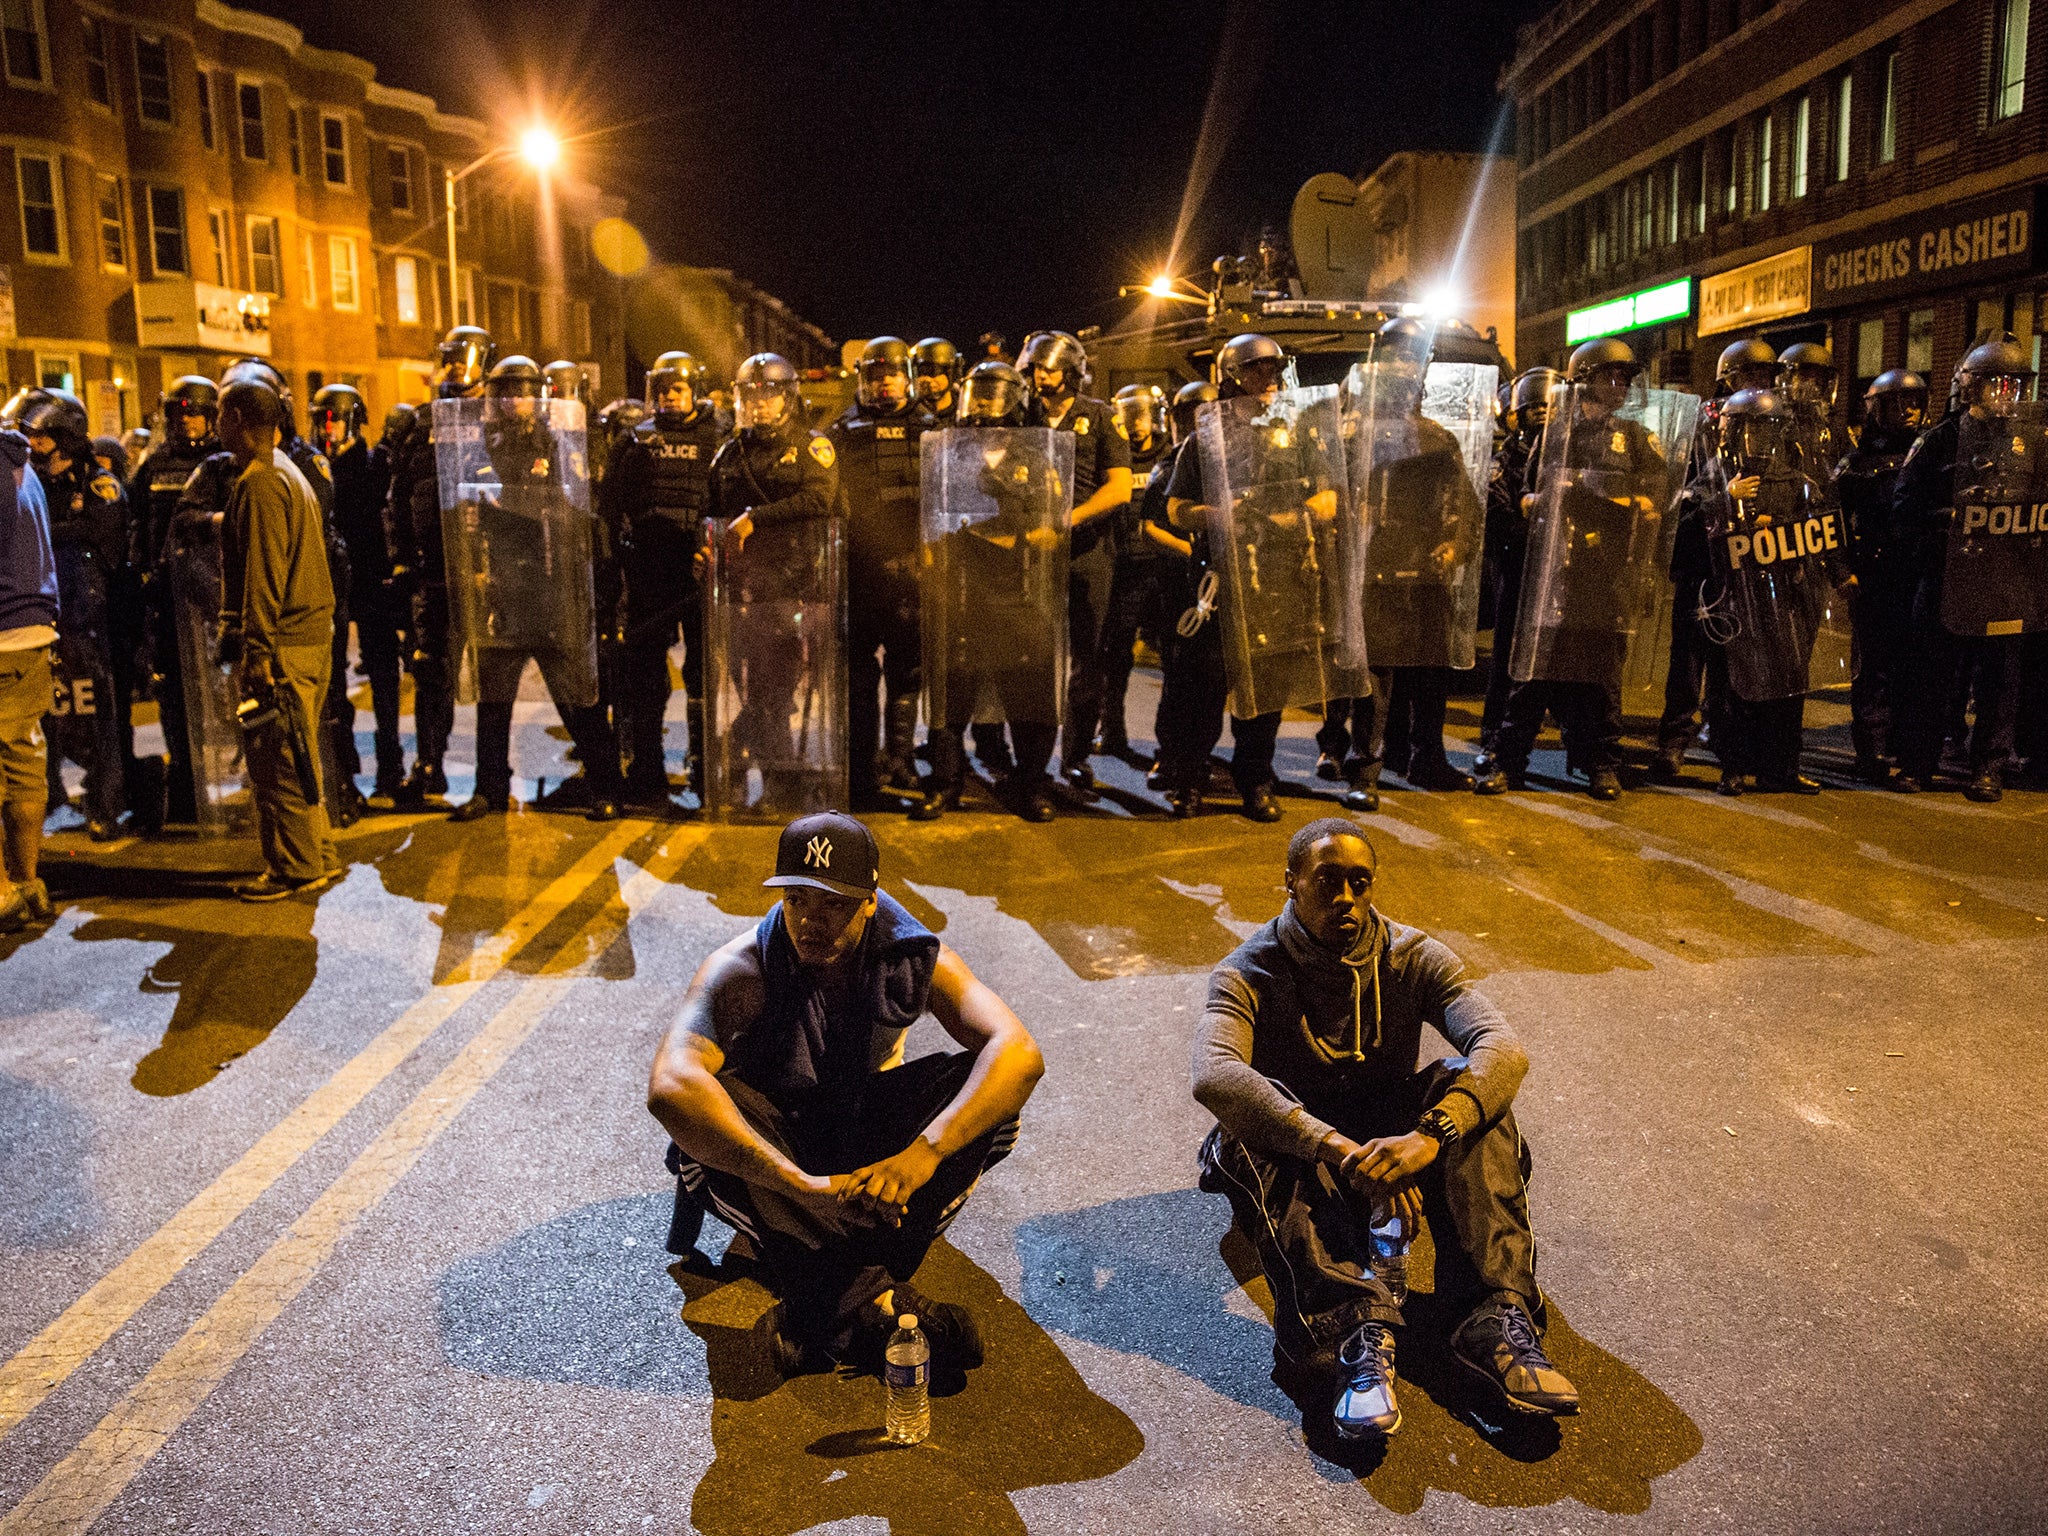 The case of Freddie Gray sparked protests in Baltimore